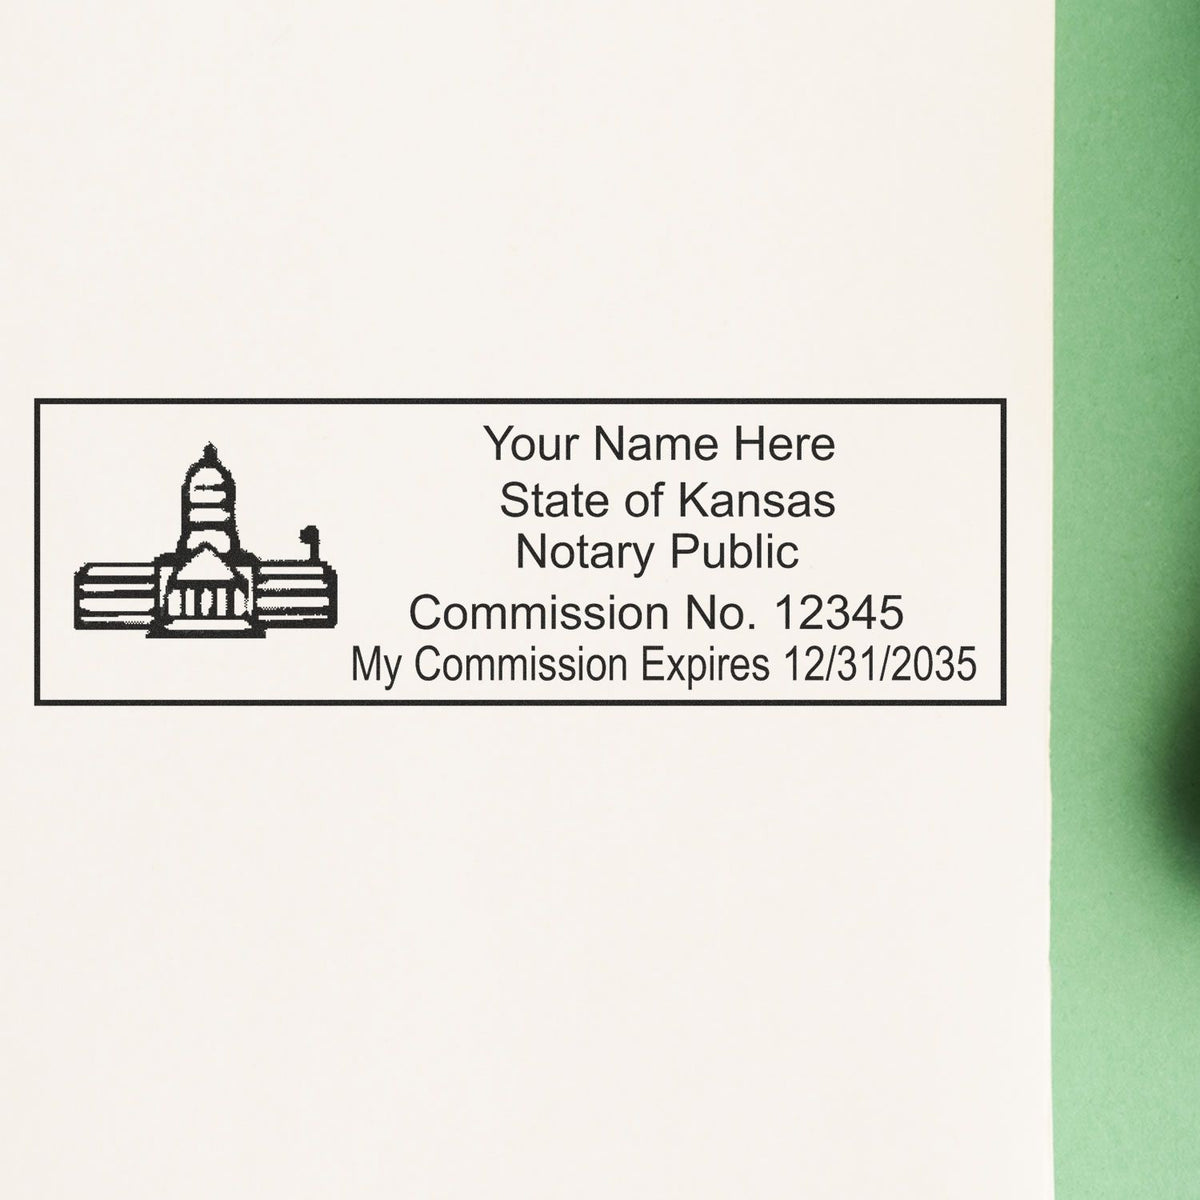 The Slim Pre-Inked State Seal Notary Stamp for Kansas stamp impression comes to life with a crisp, detailed photo on paper - showcasing true professional quality.